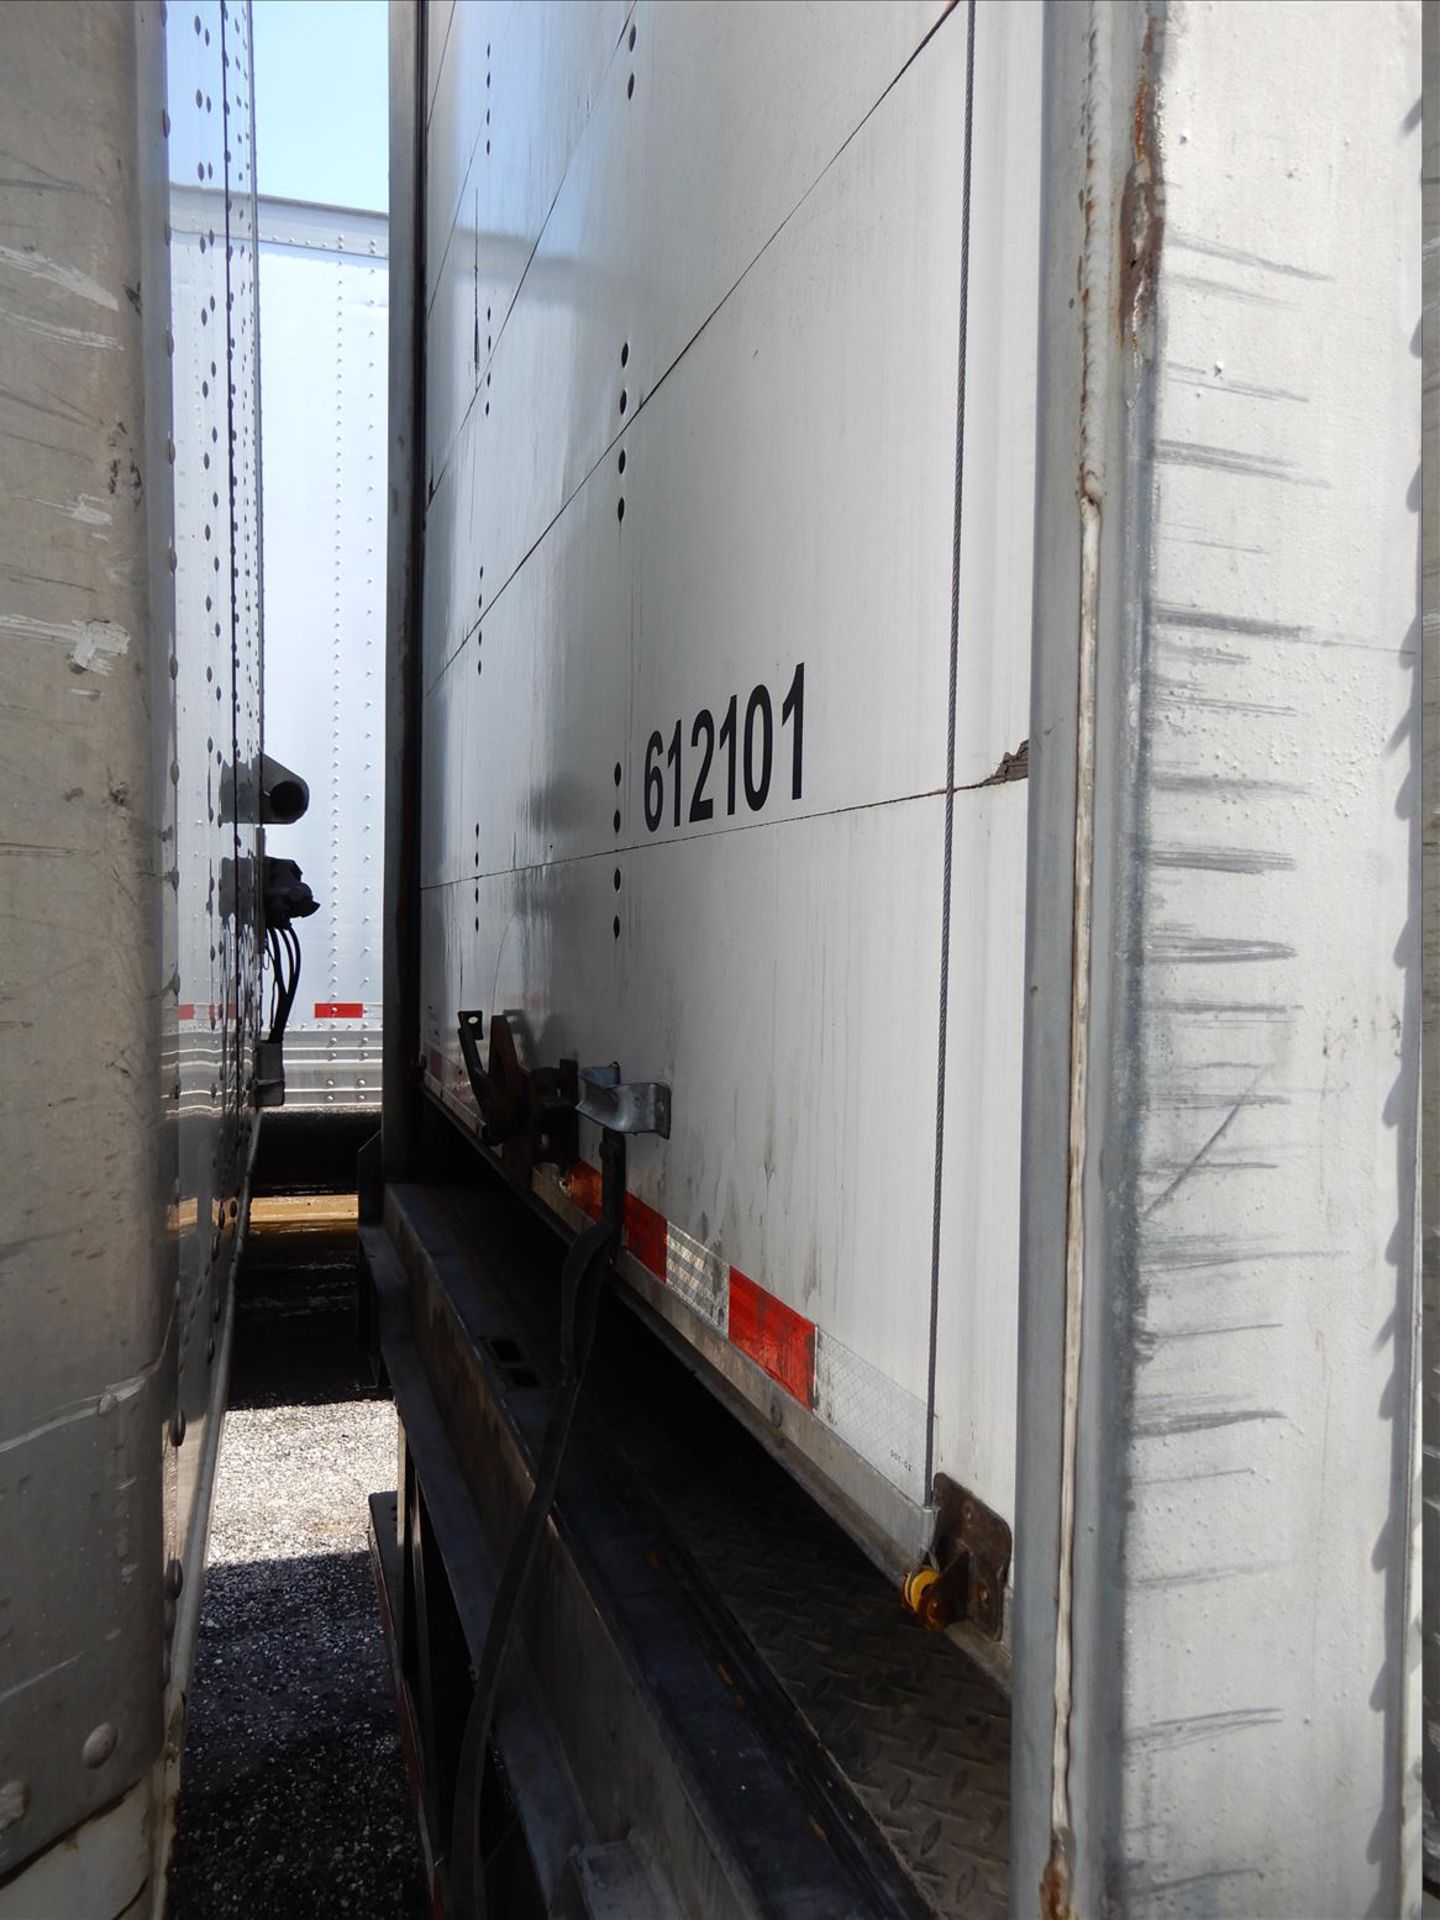 2012 Vanguard Trailer - Located in Indianapolis, IN - Image 17 of 27